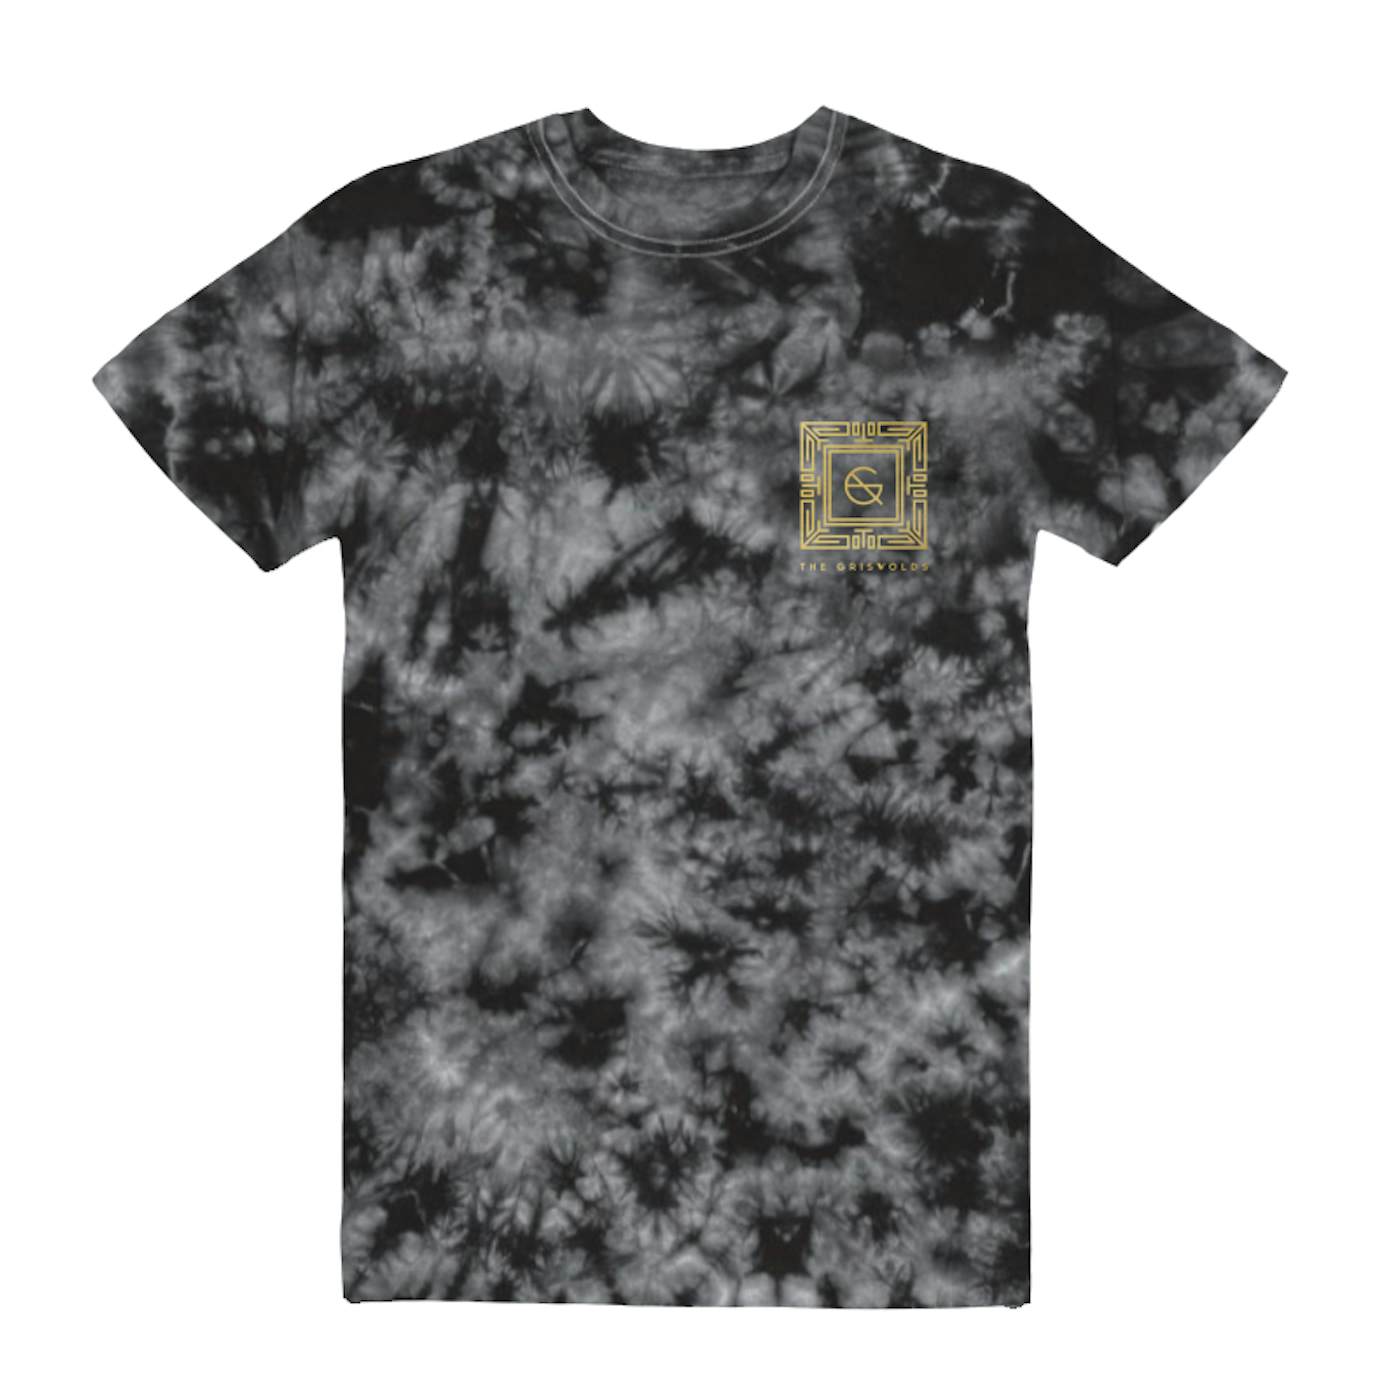 The Griswolds - Logo Tie-Dye Tee and Vinyl Bundle